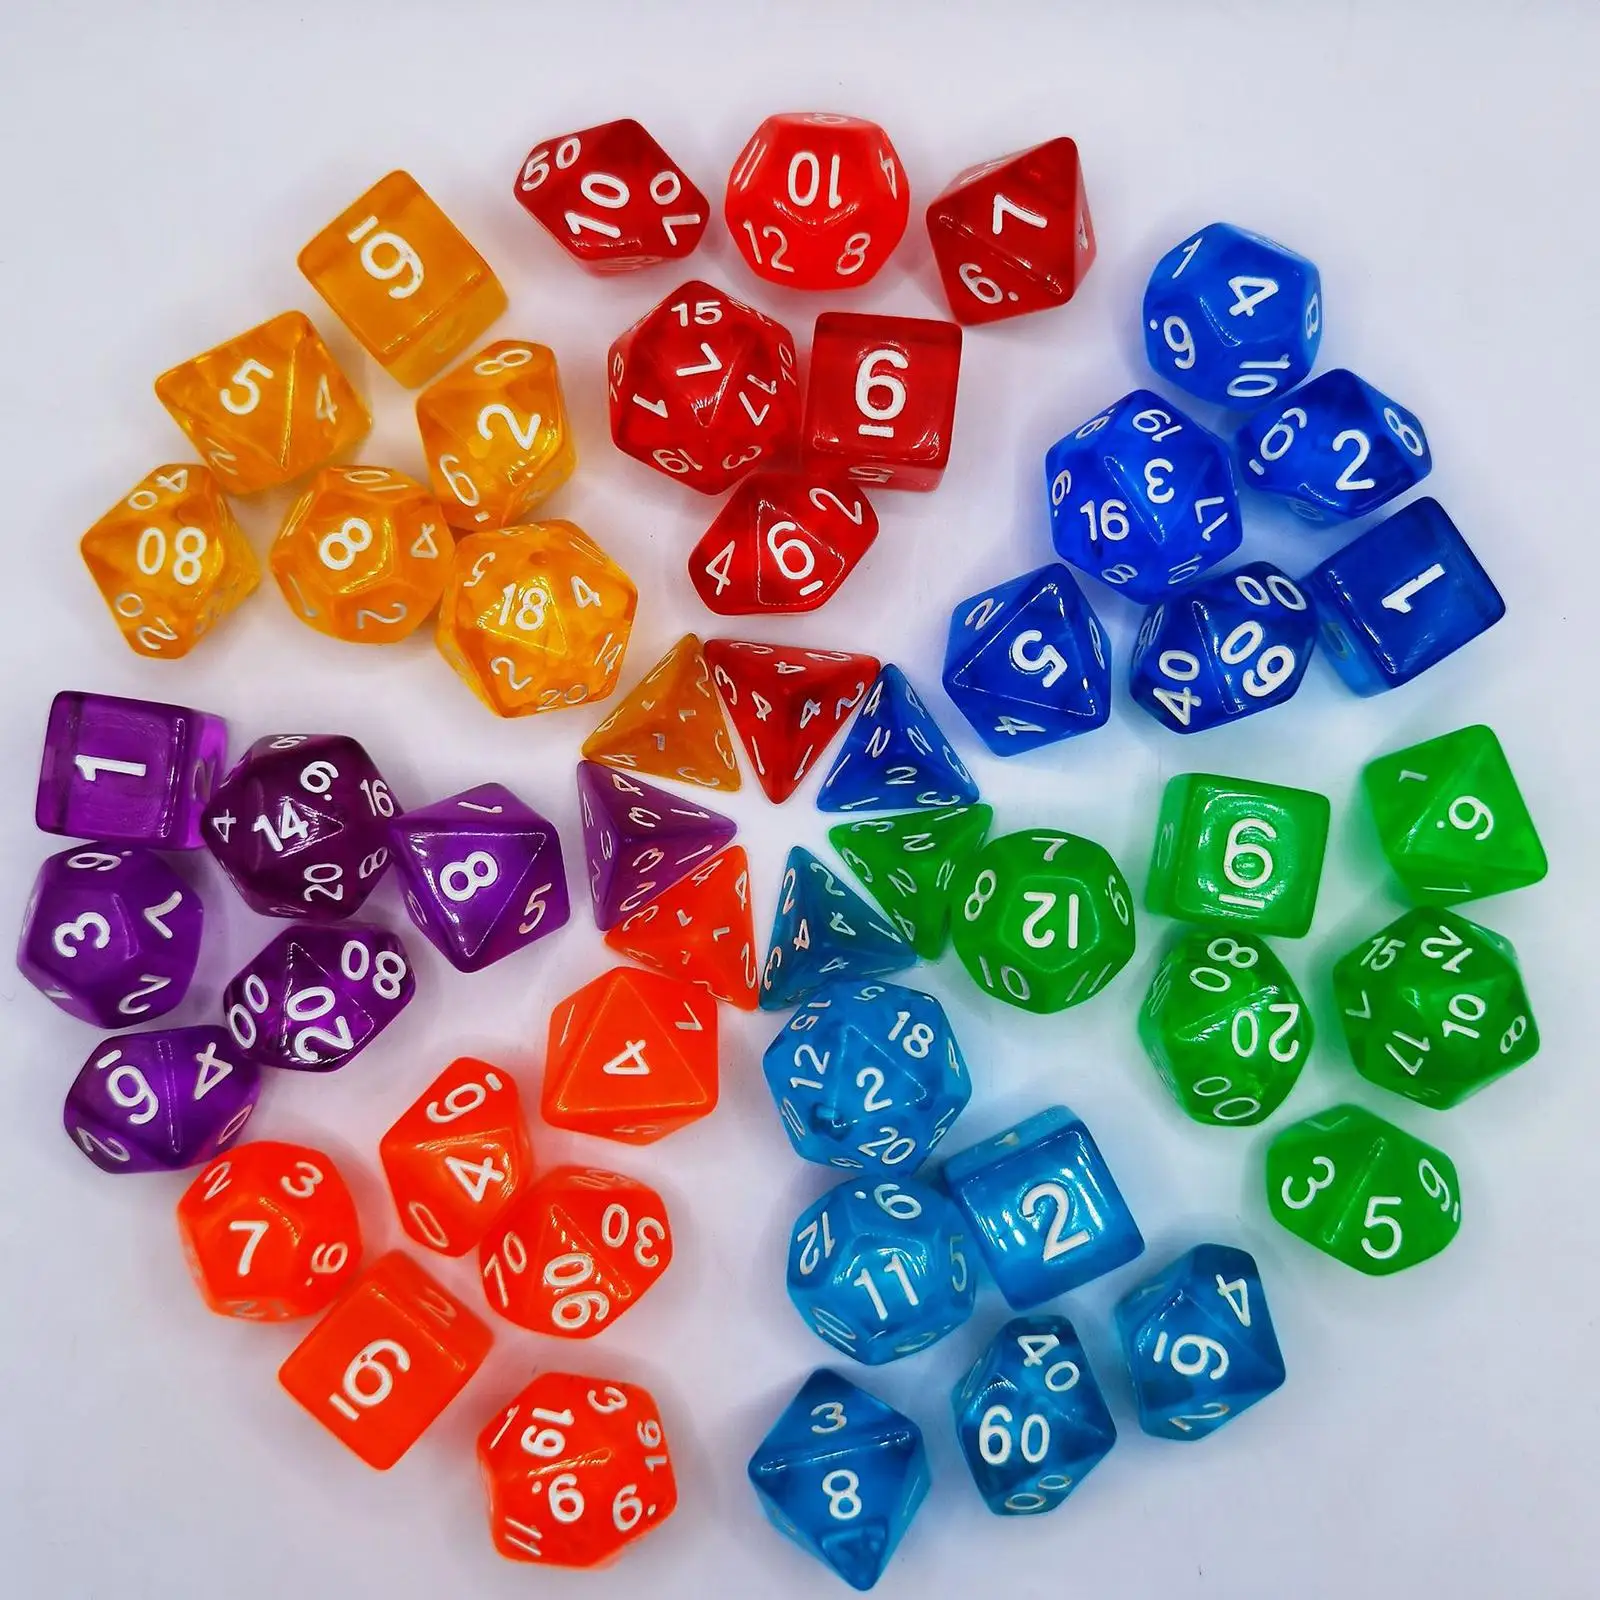 Engraved Polyhedral Dices 49 Pieces Rolling Dices for Beach Day Table Games